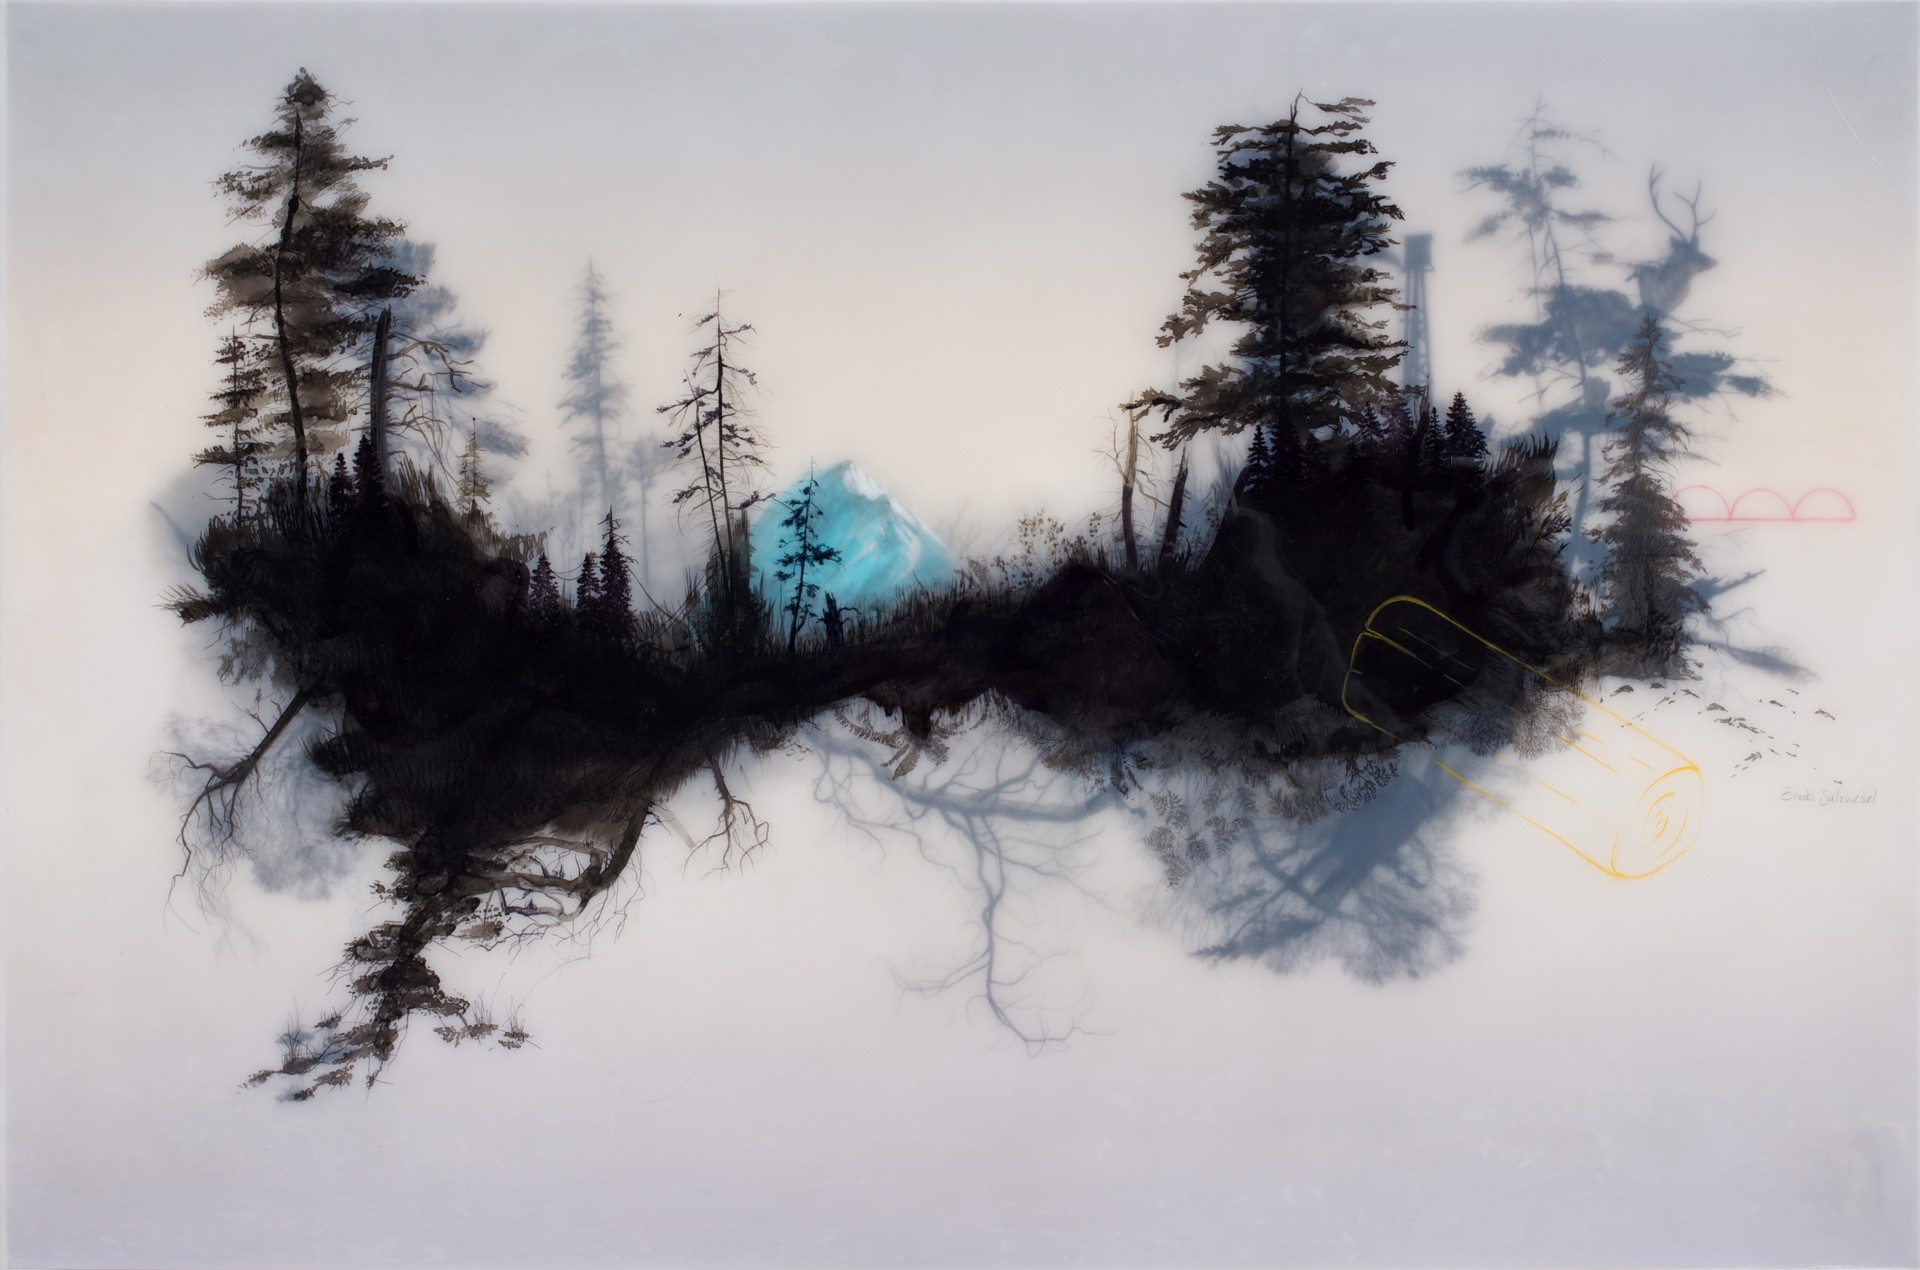 Aware Of All The Things, 2019 by Brooks Salzwedel